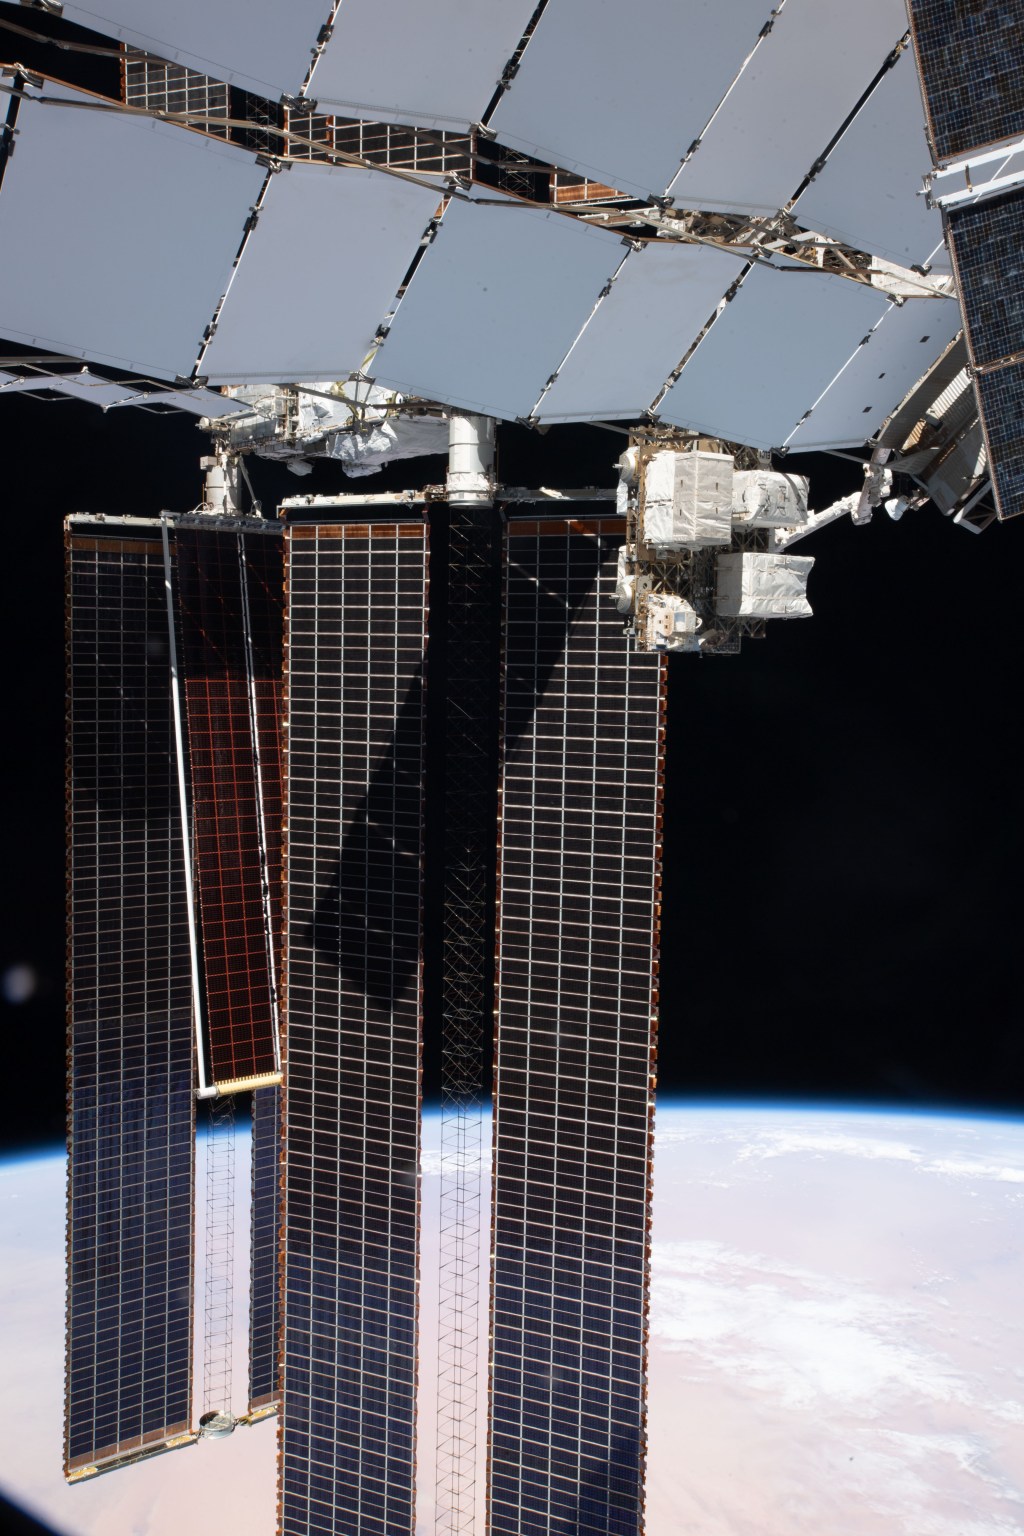 The second ISS Roll-Out Solar Array (iROSA) is pictured after completing its roll out on the International Space Station's Port-6 truss structure's 2B power channel